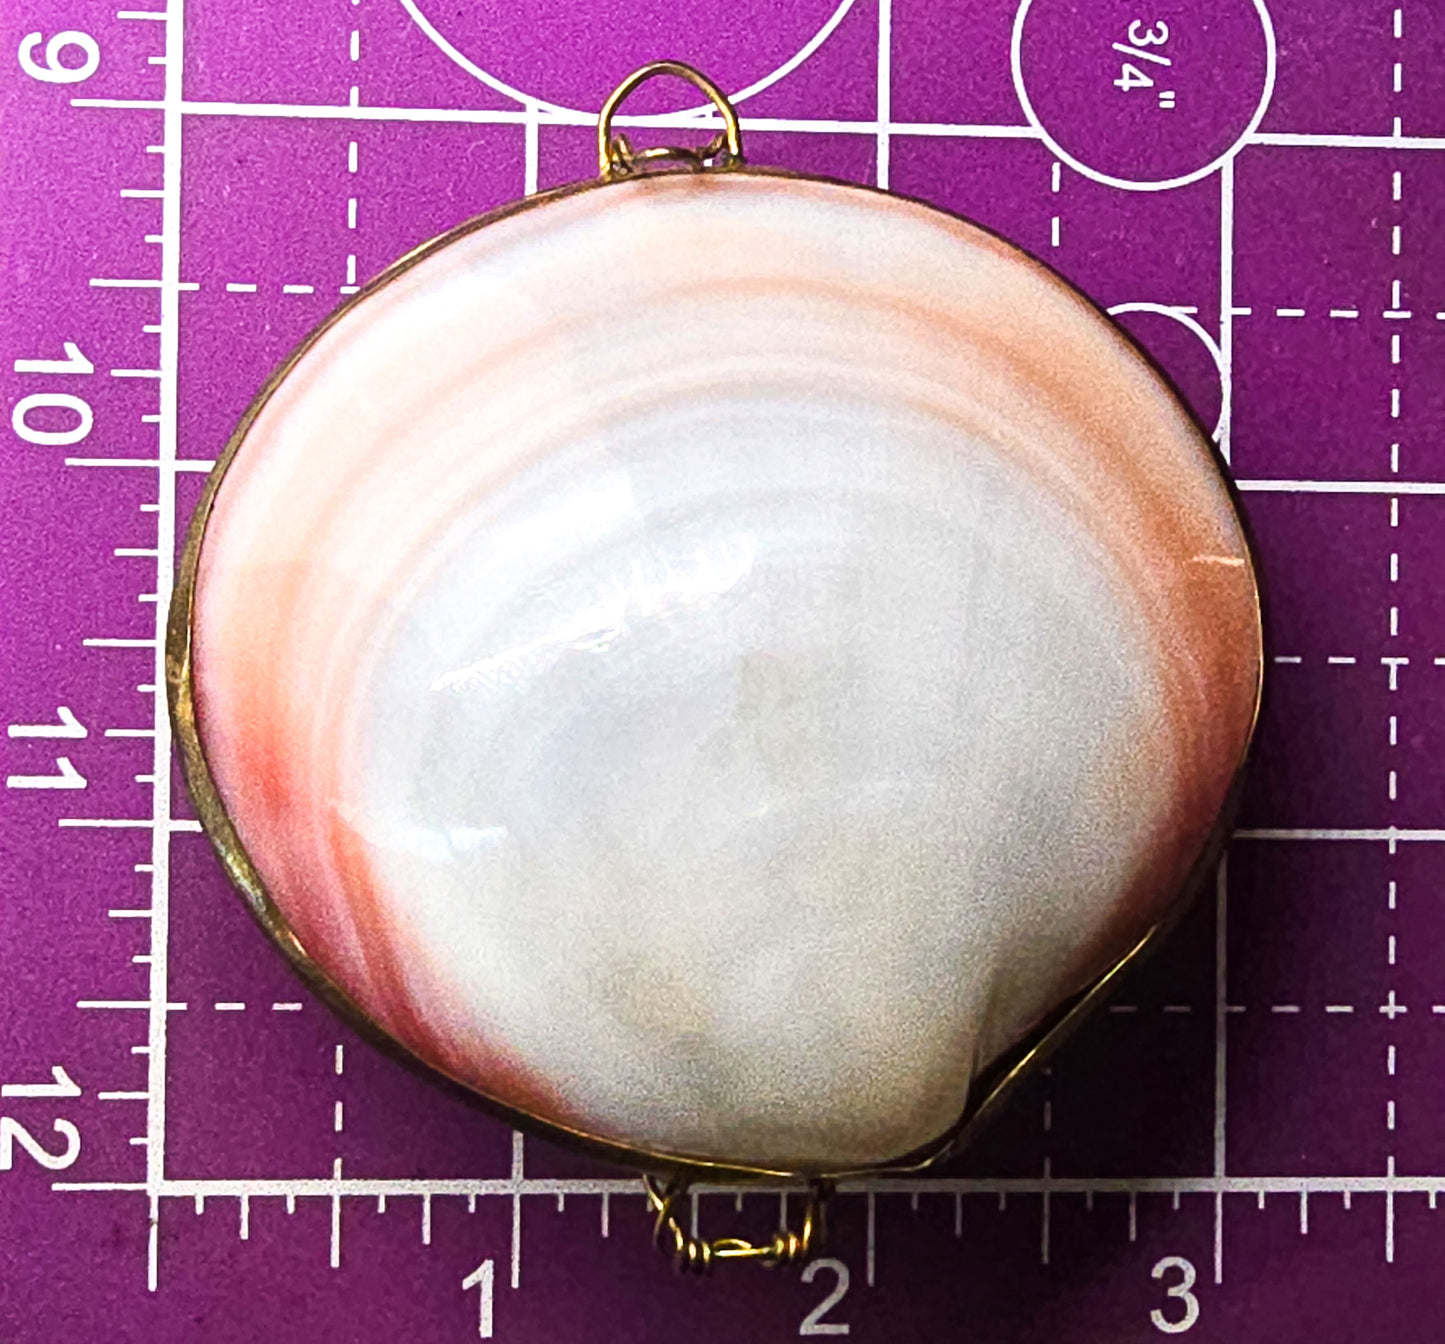 Clam Sea shell vintage hinged compact coin purse trinket box